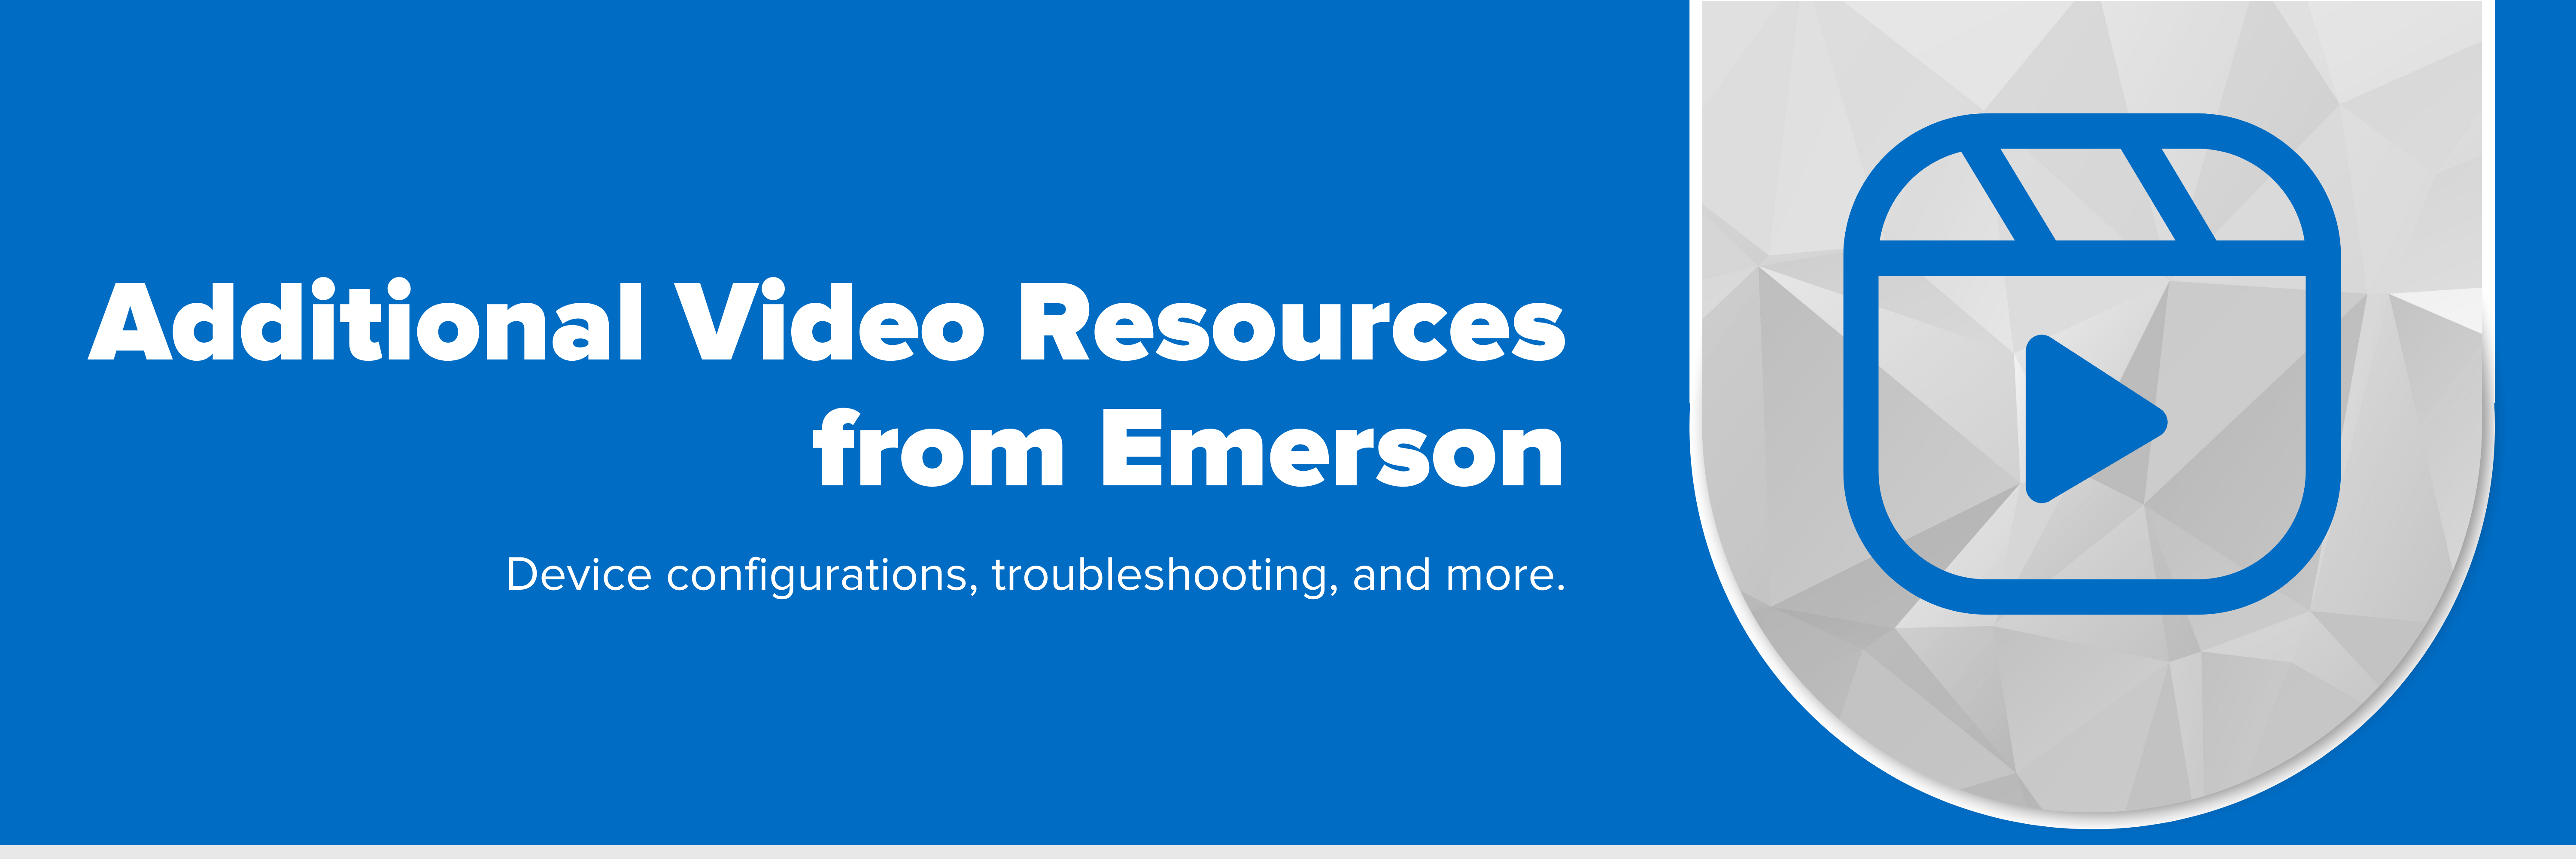 Header image with text "Additional Video Resources from Emerson"